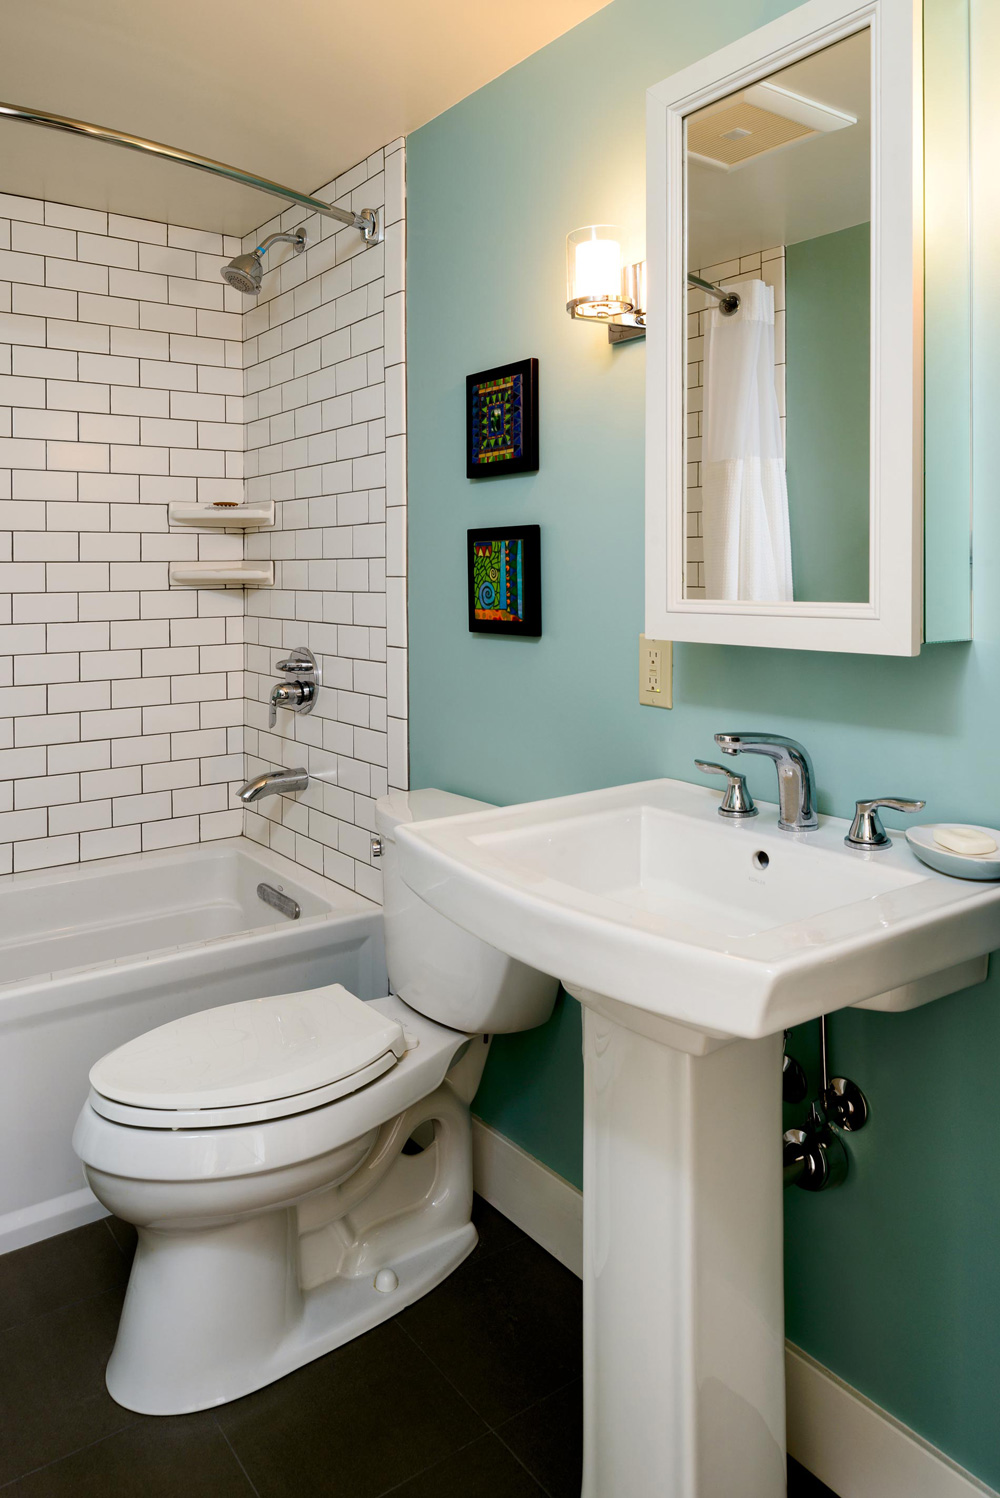 5 Creative Solutions for Small Bathrooms | Hammer & Hand